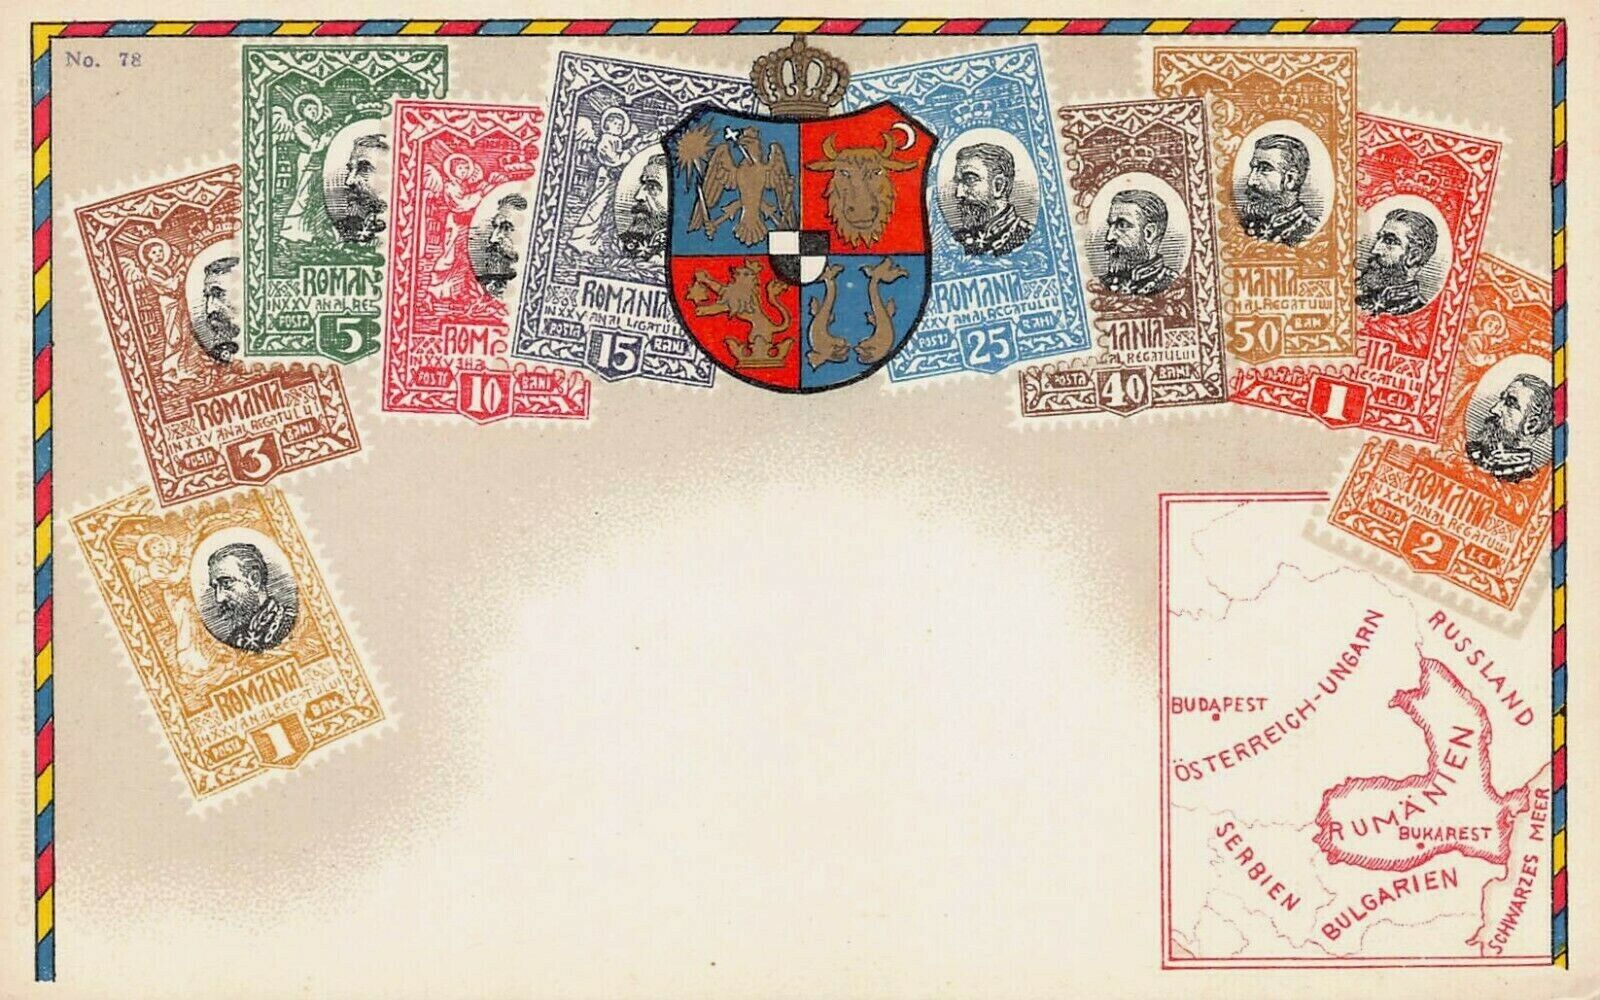 Romania, Stamp Images on Early Postcard, Published by Ottmar Zieher